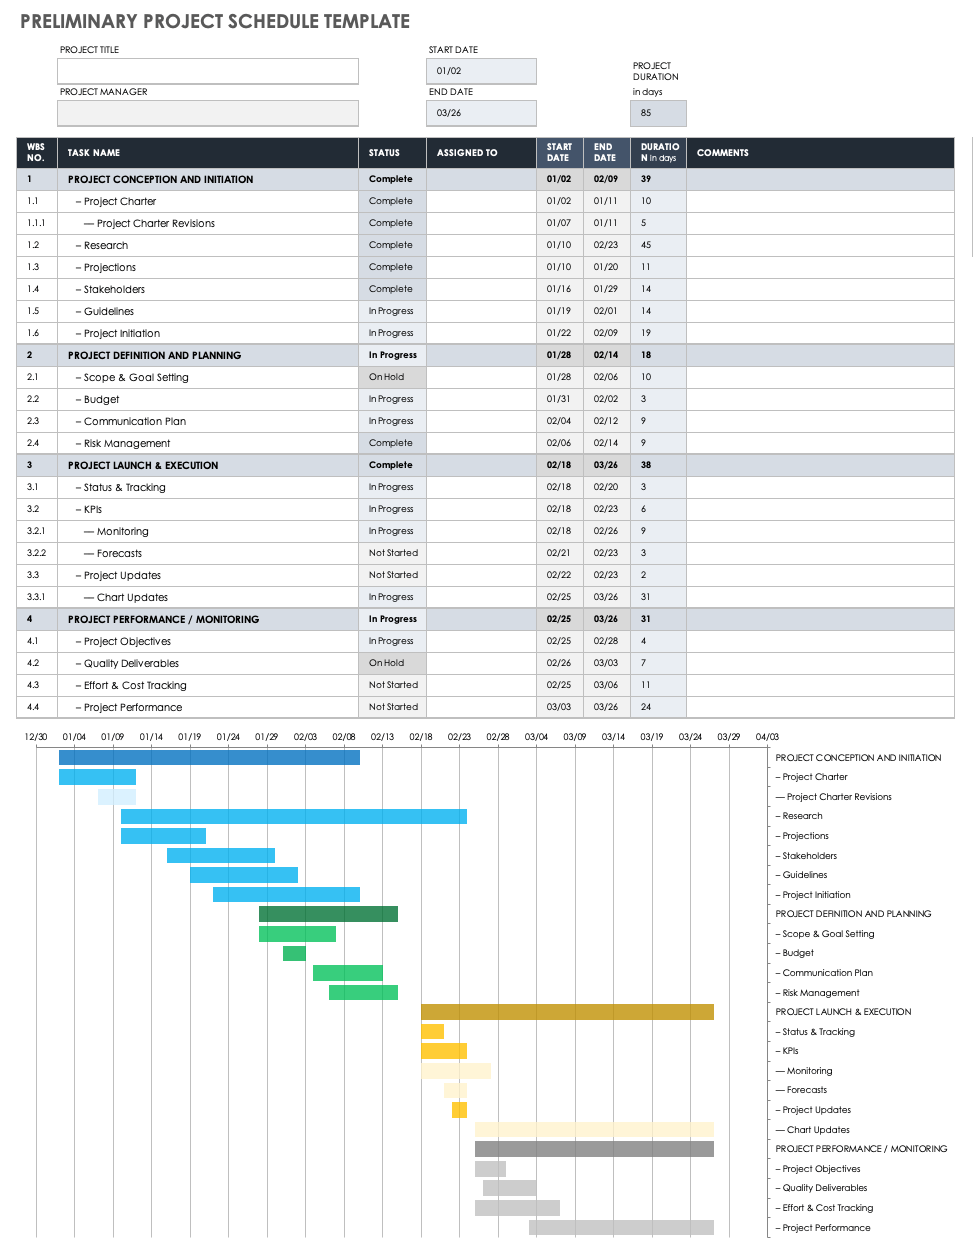 Preliminary Project Schedule Template